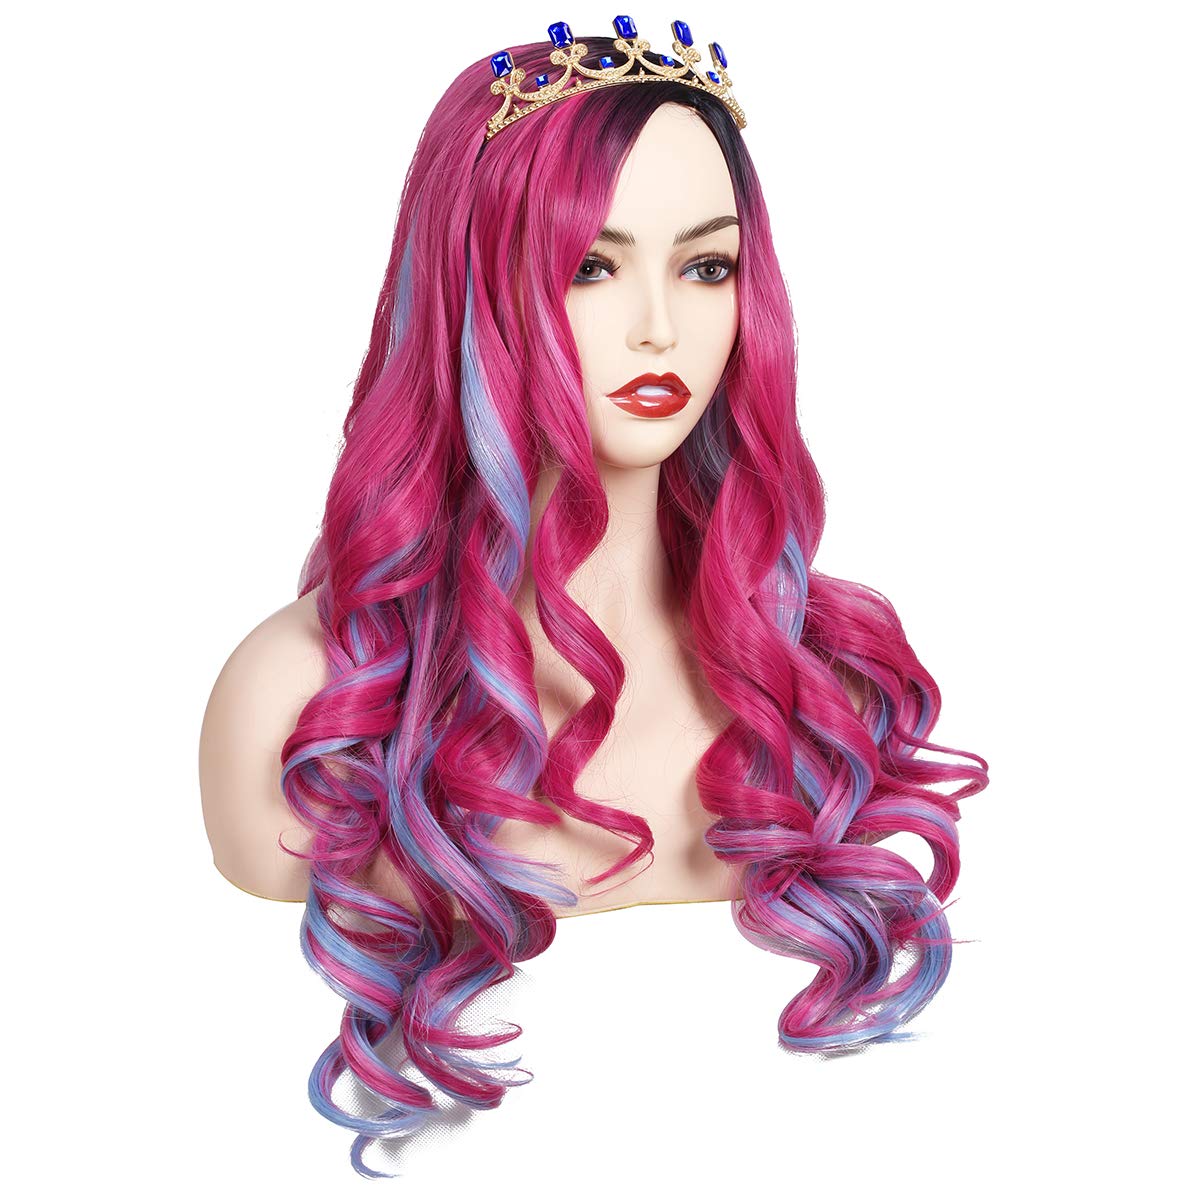 Price:$25.90    ColorGround Long Wavy Pink and Light Blue Mixed Cosplay Wig with Crown (Adult Size)  Beauty